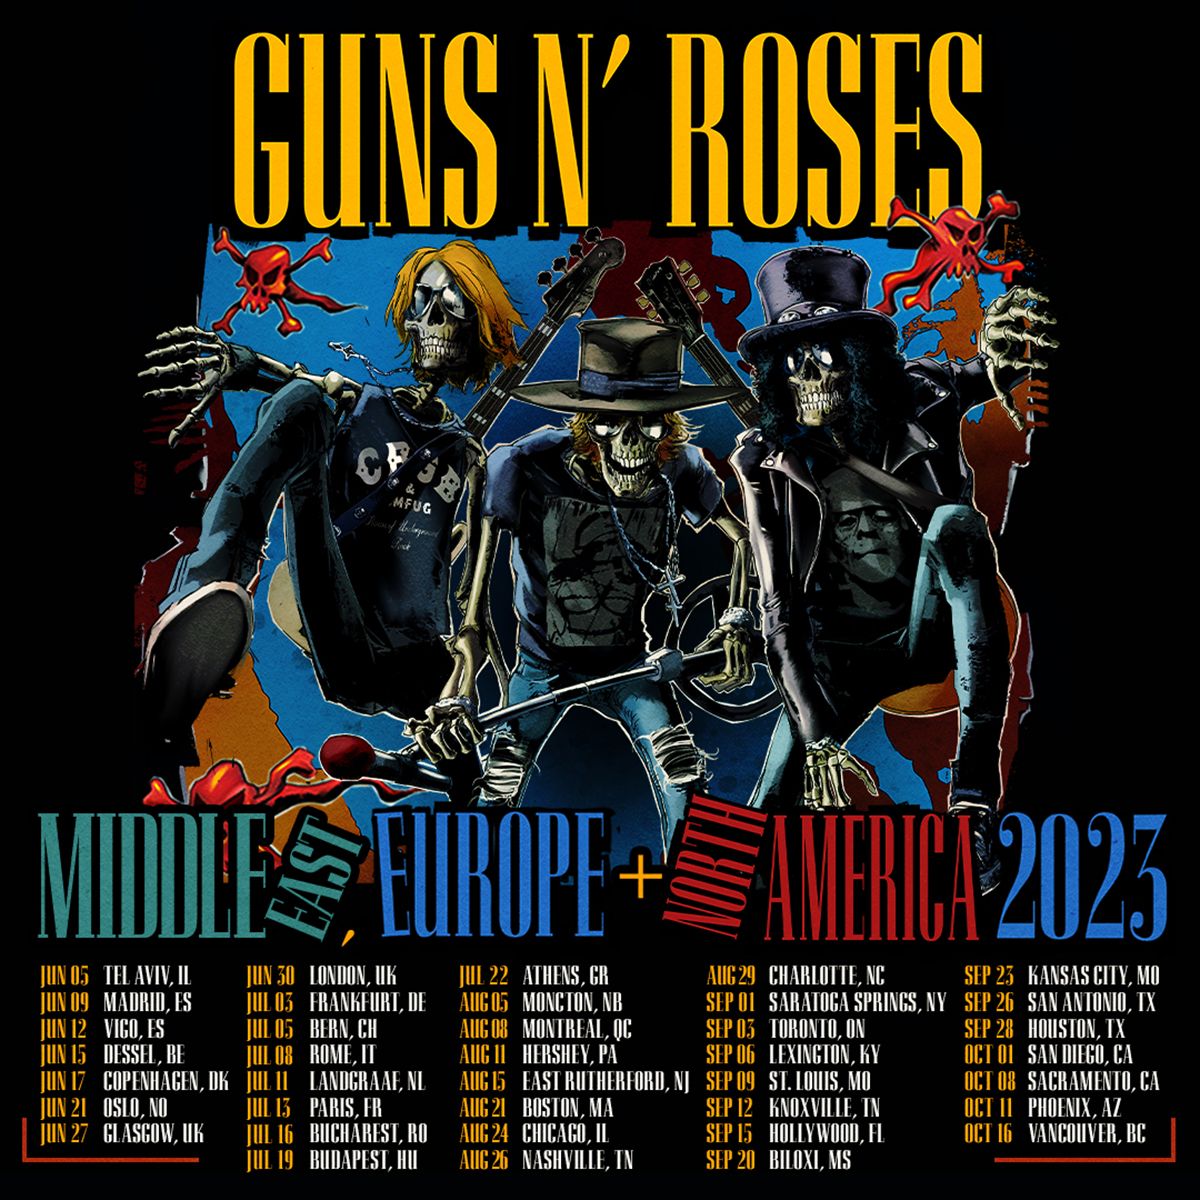 Rock And Roll Legends Guns N’ Roses Announce 2023 World Tour